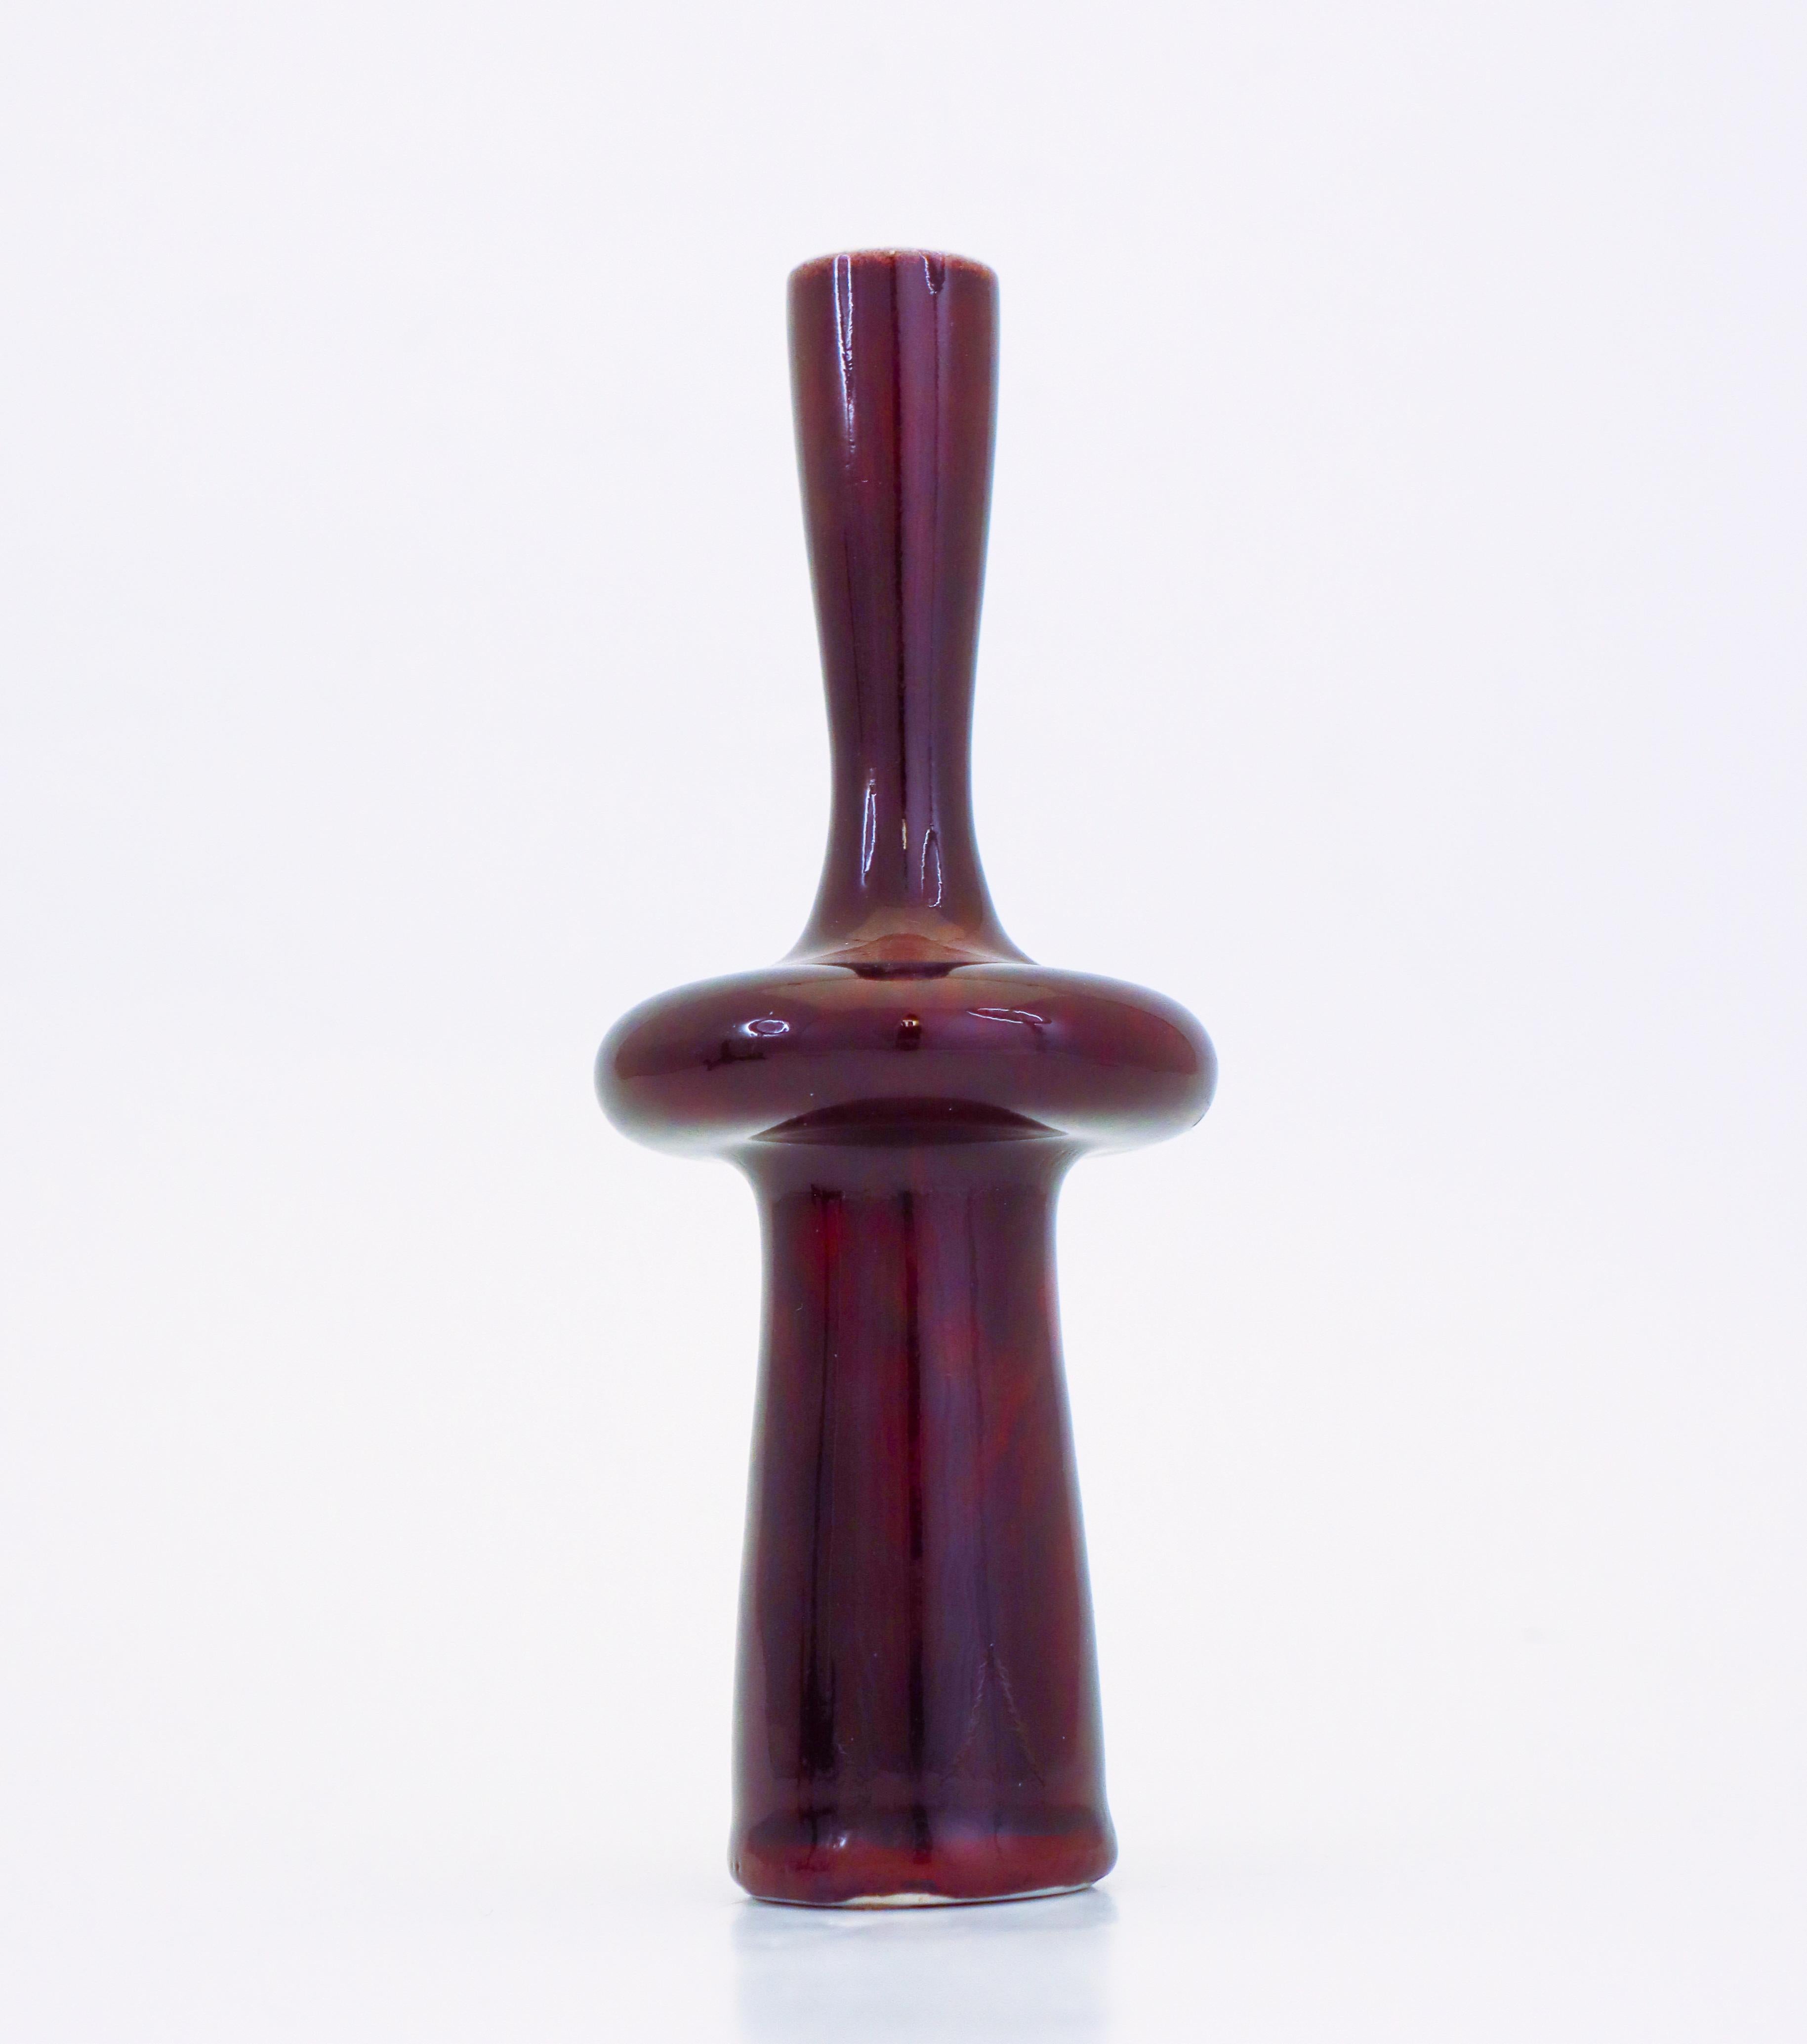 A oxblood colored porcelain vase with a lovely glossy glaze designed by Stig Lindberg at Gustavsberg. The vase is 18,5 cm high and 7.5 cm in diameter. It is in excellent condition except from some minor marks from the production. This is a uniques